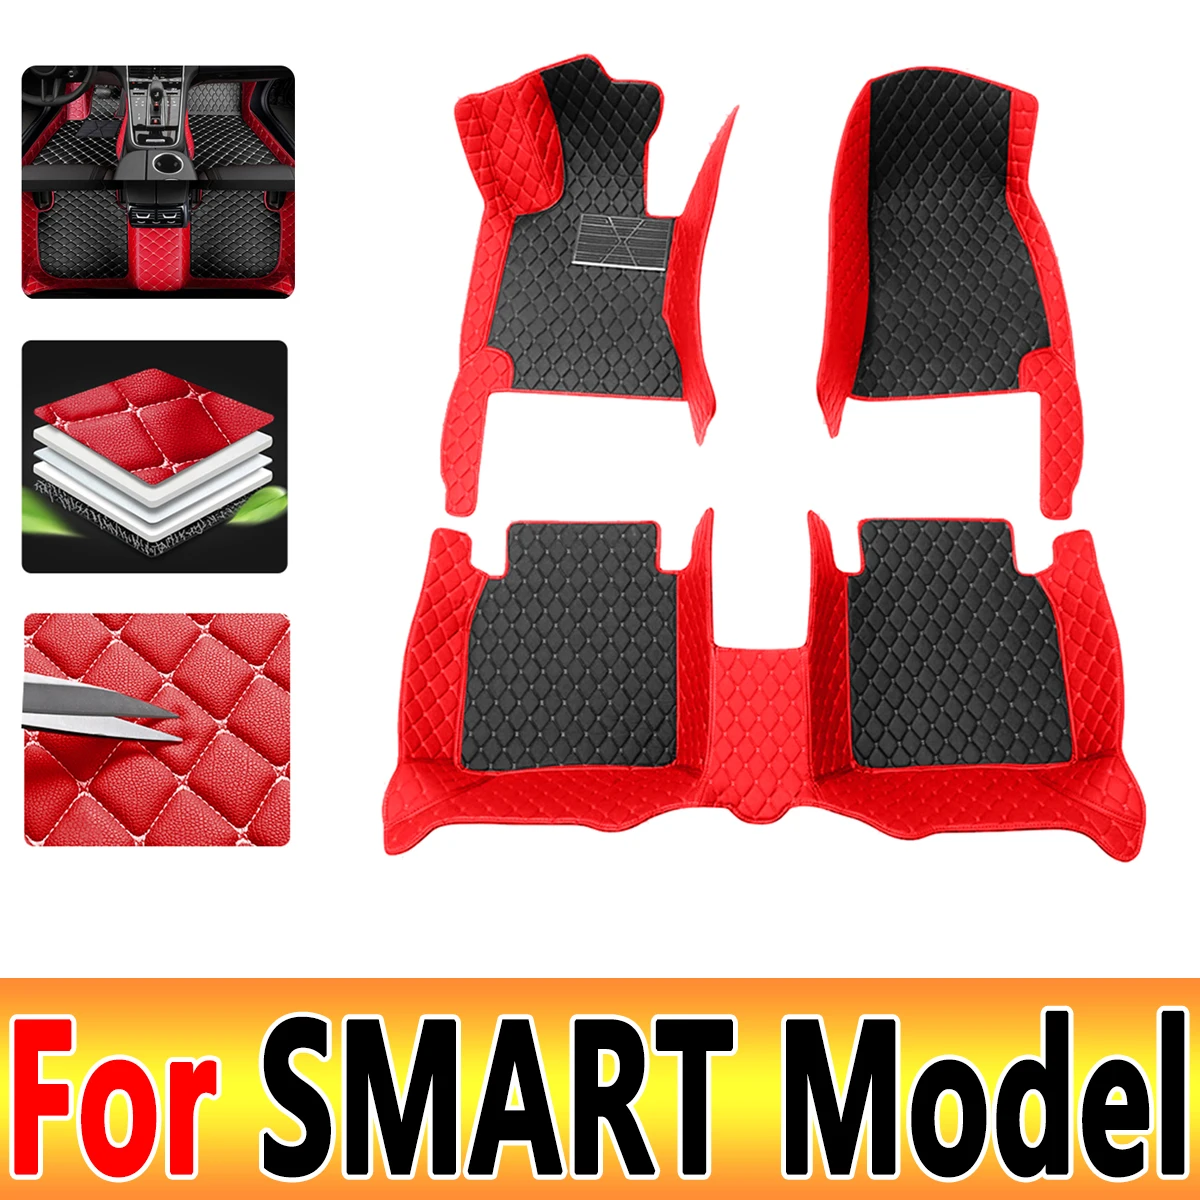 

Car Mats Floor For SMART fortwo 2seat Forfour Smart fortwo 2seat forfour 4seat Roadster Car Accessories 2022 2023